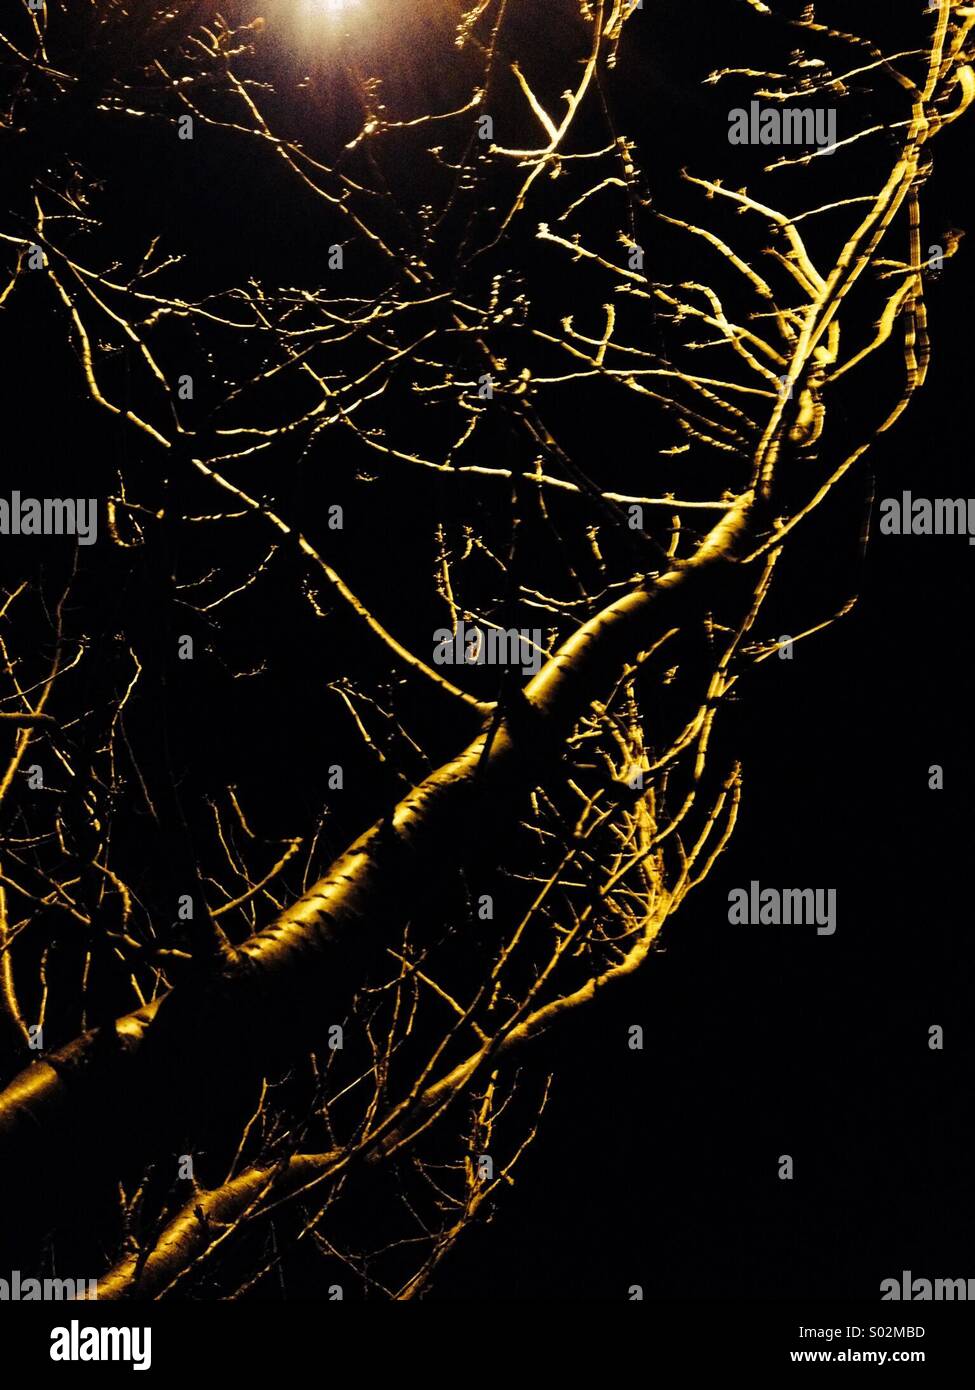 Tree branches at night Stock Photo